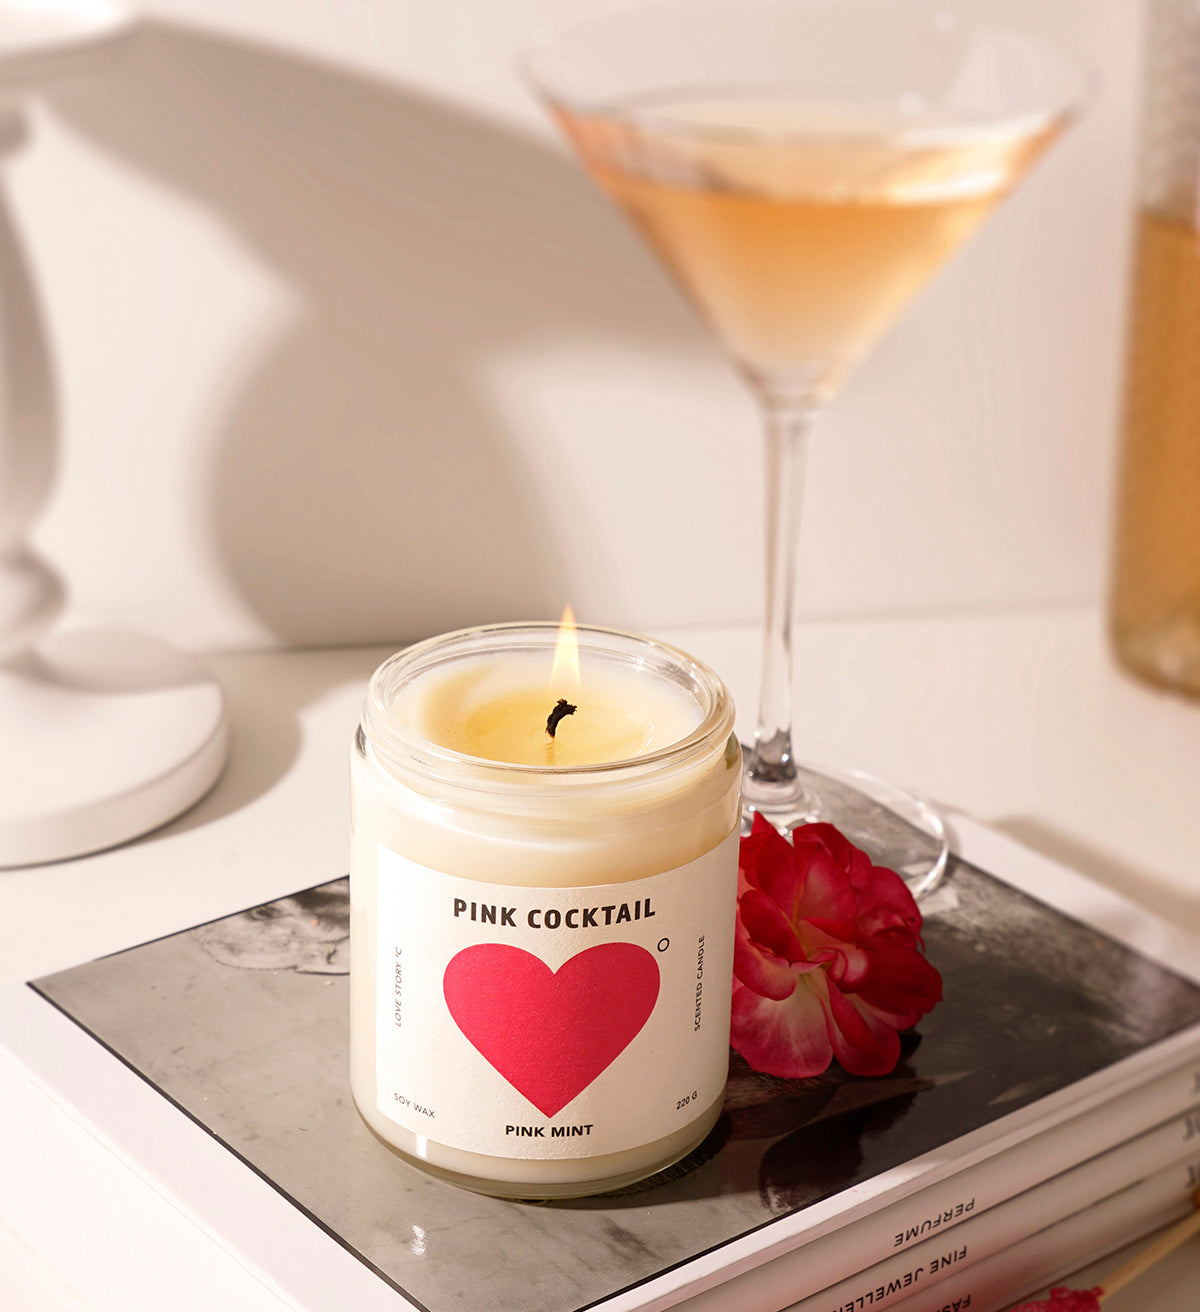 PINK COCKTAIL SOY CANDLE